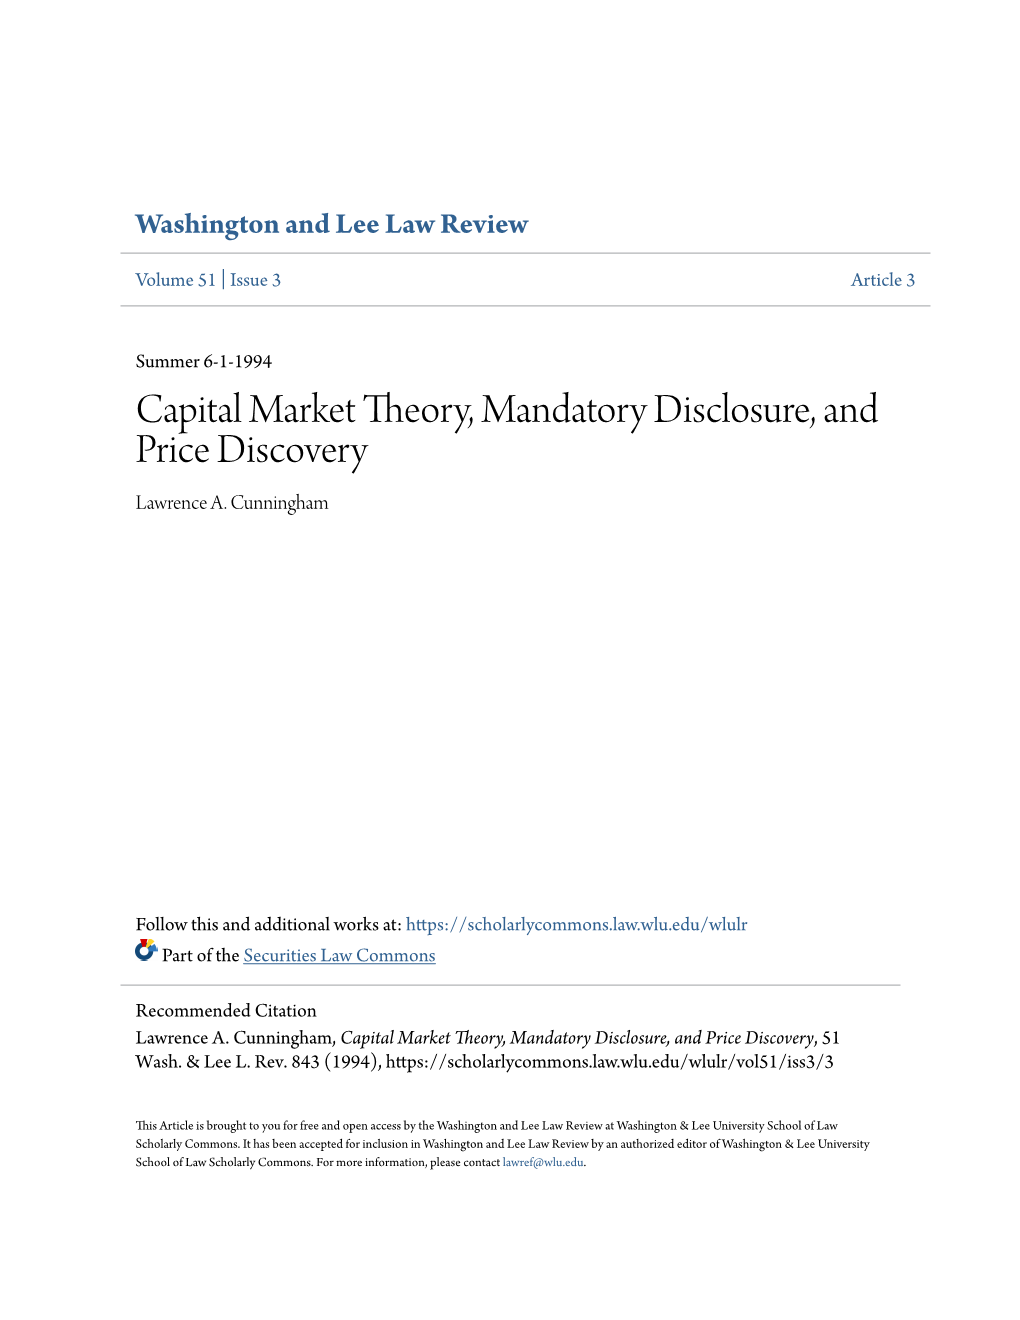 Capital Market Theory, Mandatory Disclosure, and Price Discovery Lawrence A